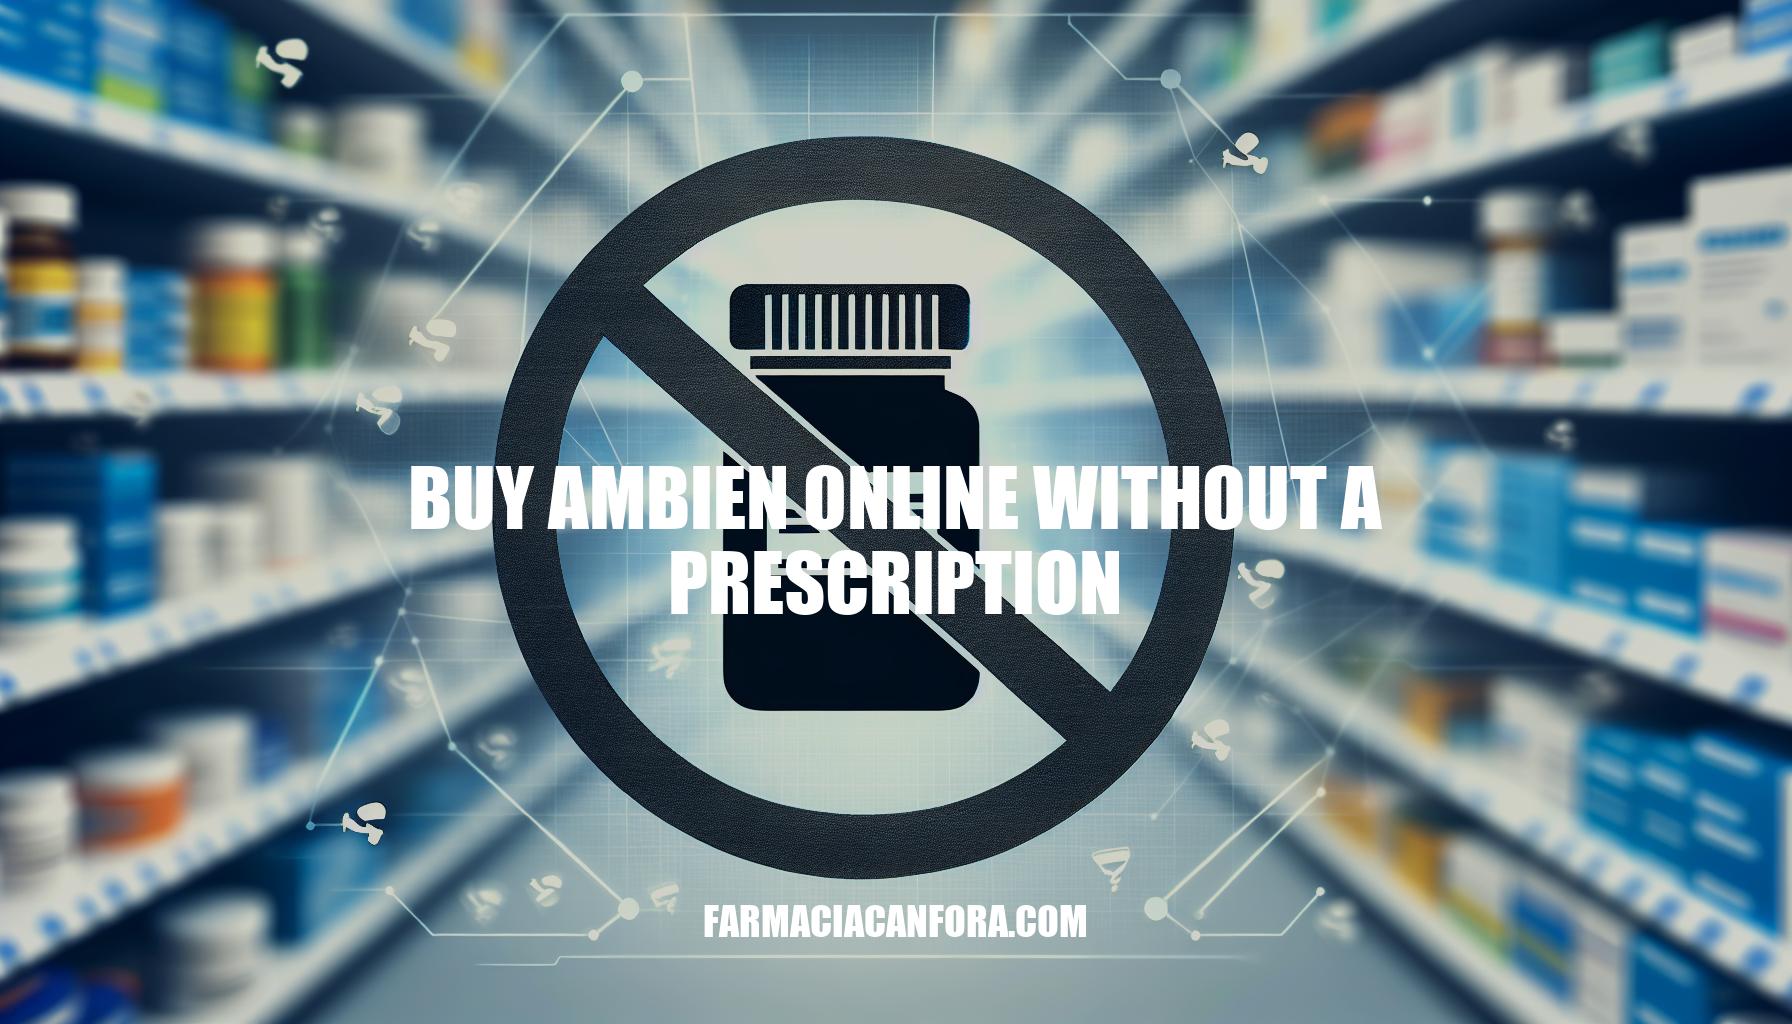 Is It Safe to Buy Ambien Online Without a Prescription?